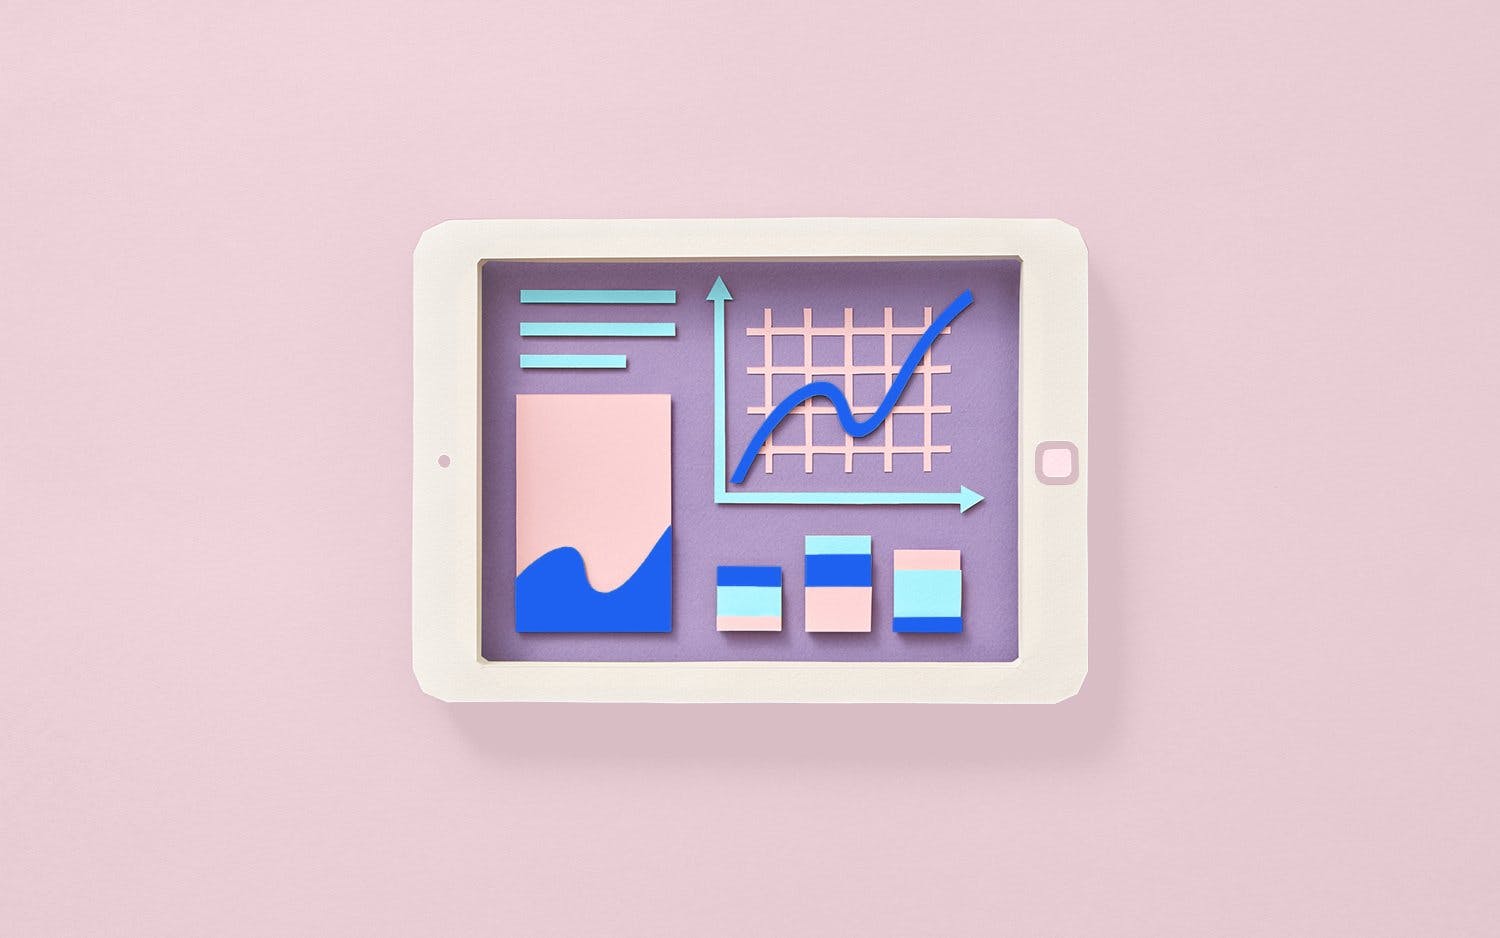 Stylized tablet with different types of graphs